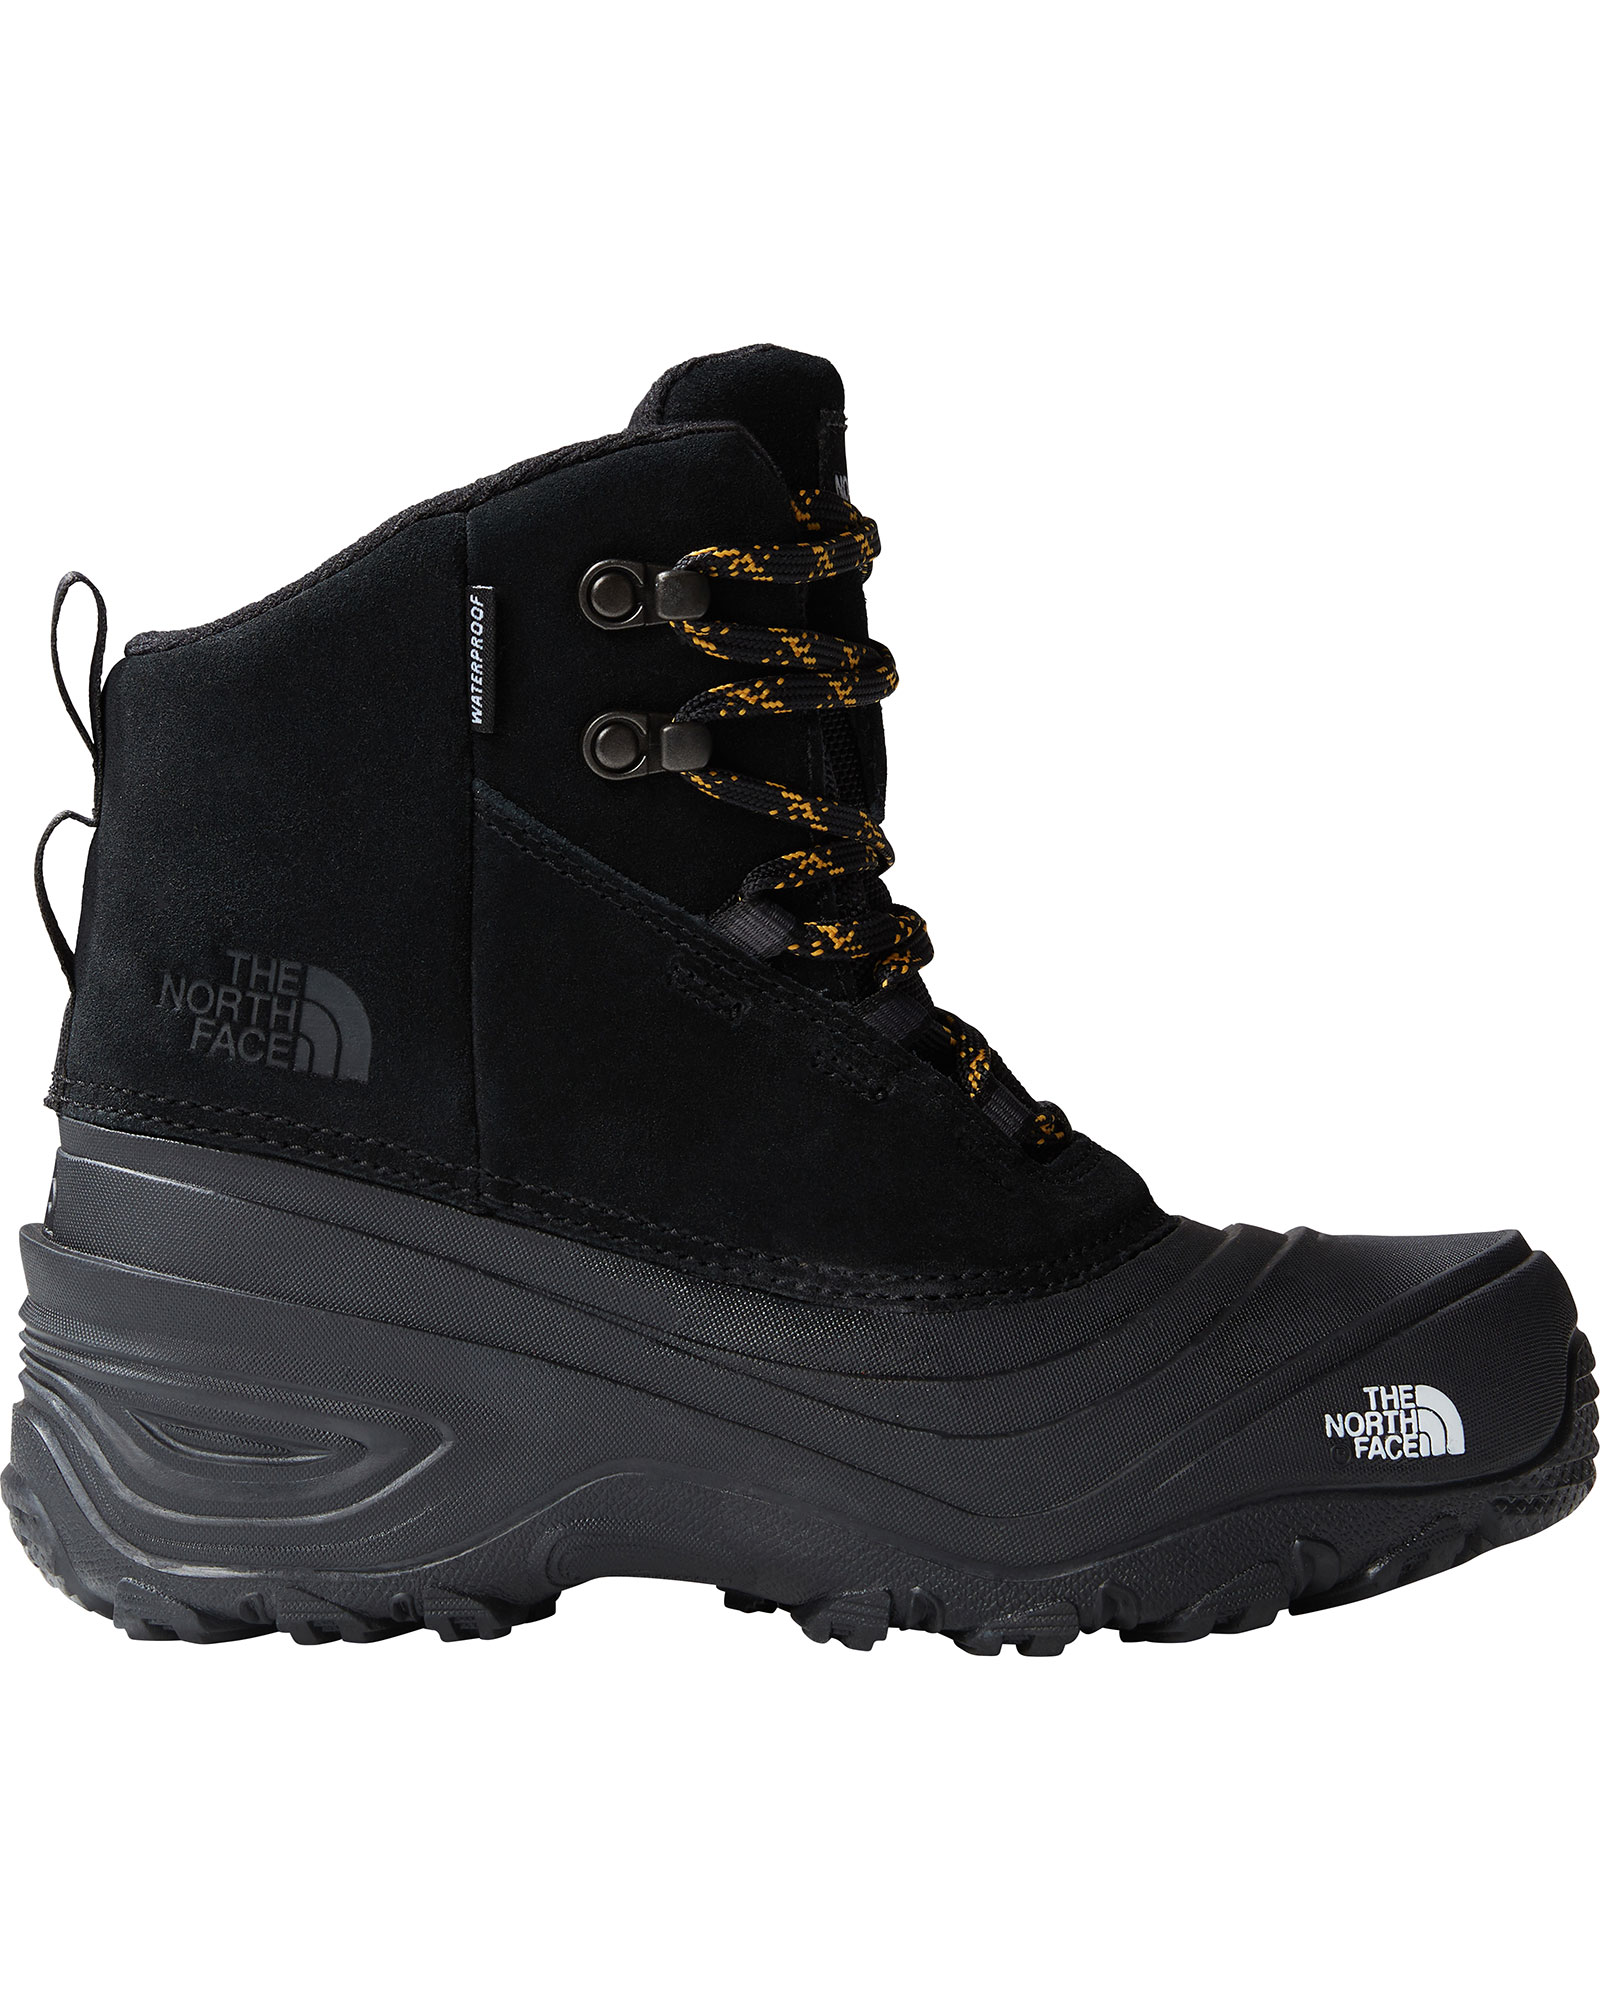 The North Face Youth Chilkat V Lace Waterproof Kid’s Boots - TNF Black/TNF Black UK 13 INF